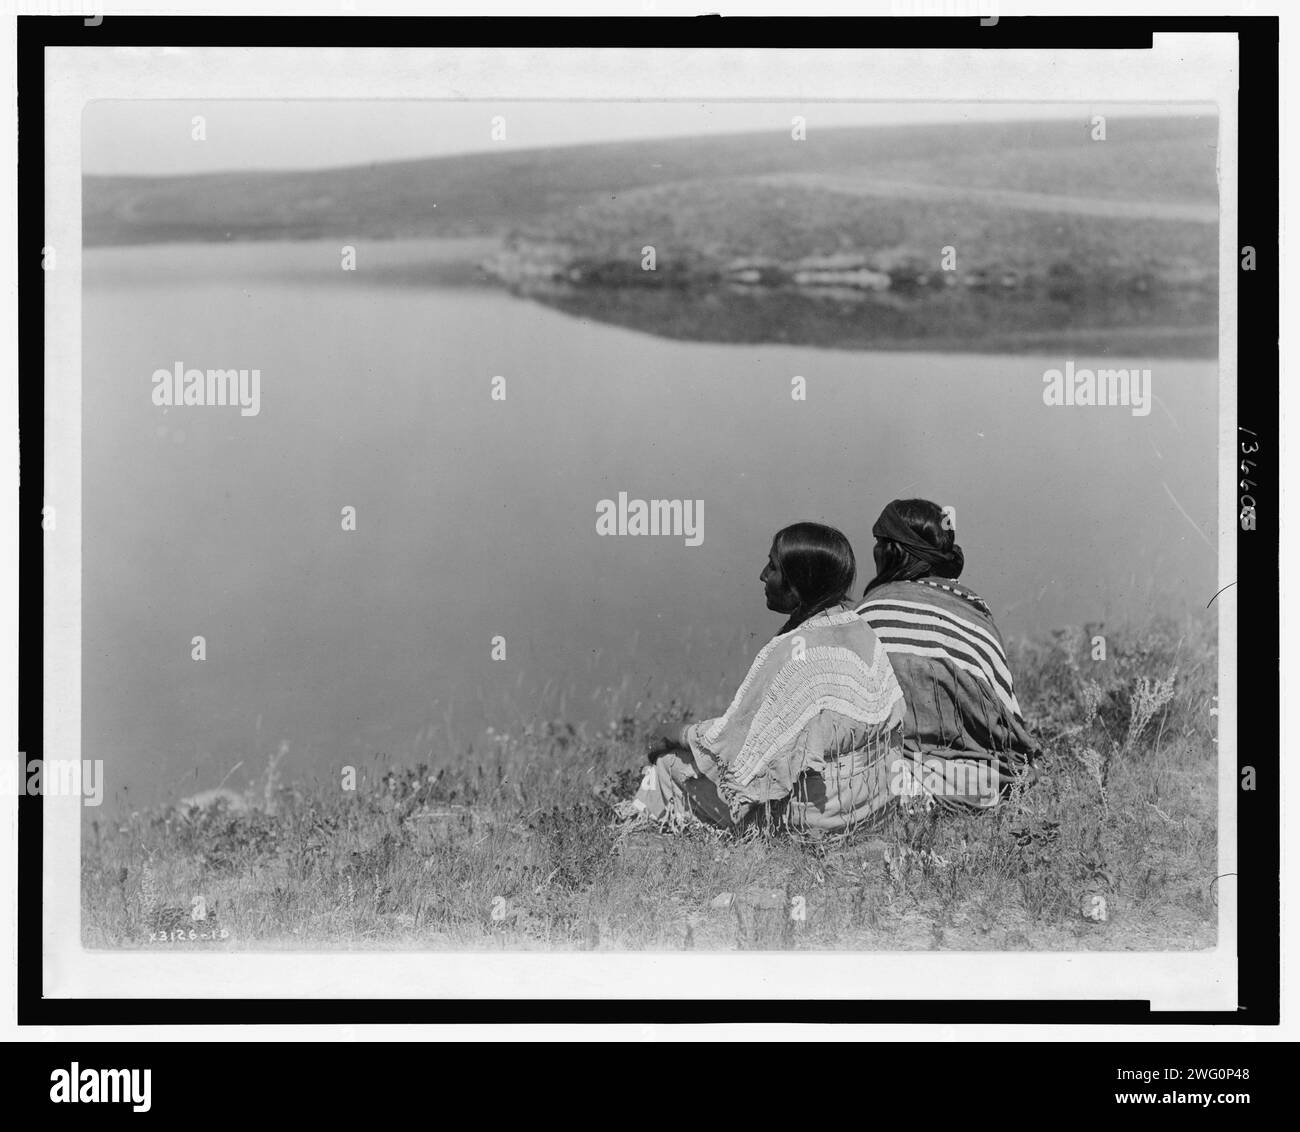 An idle hour, Piegan, c1910. Photograph shows two Piegan Indians sitting on grassy area above a body of water. Stock Photo